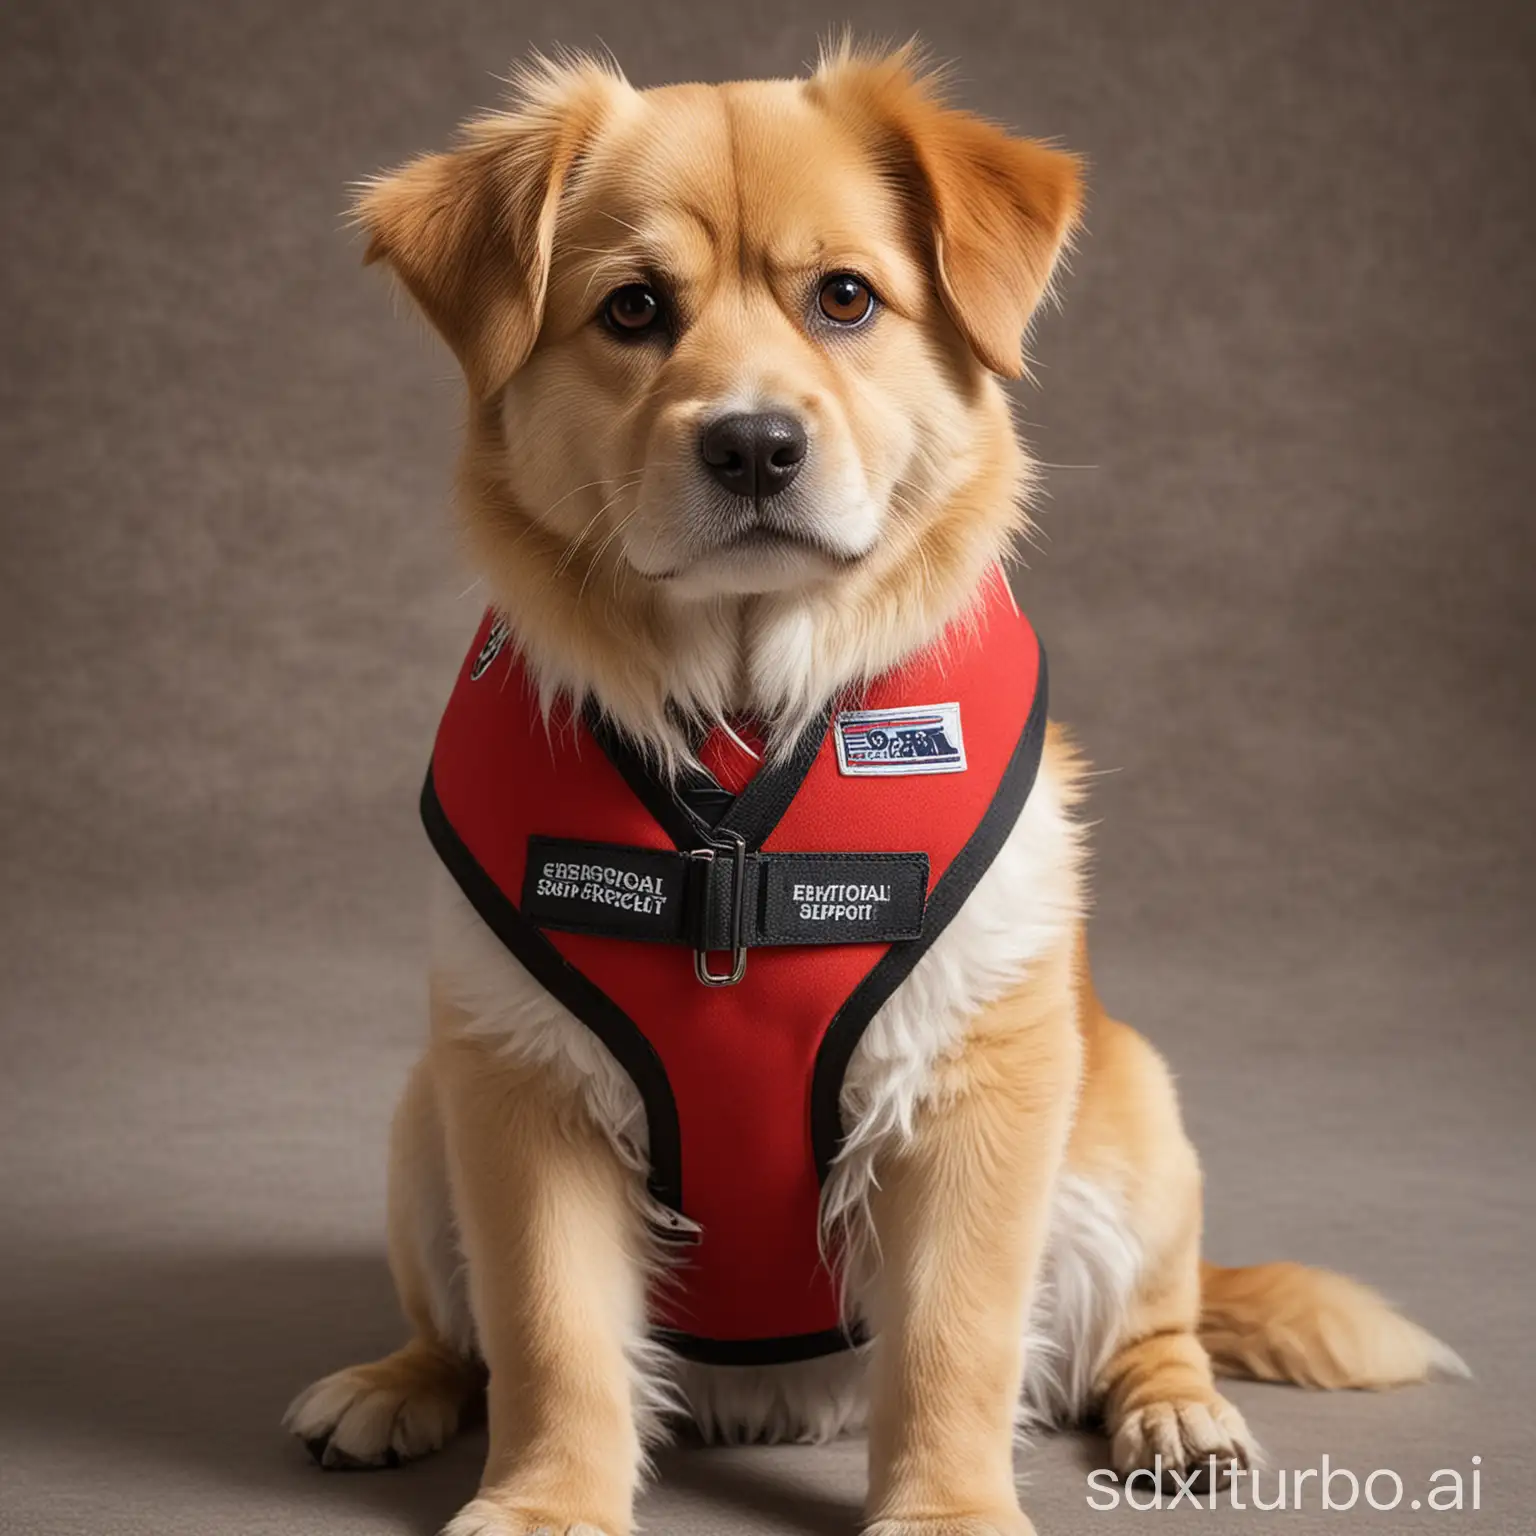 An Emotional Support Animal (ESA) is a furry best friend who provides constant companionship and unconditional love to a person dealing with any emotional, mental, or psychological challenges. Please create an image of a dog wearing an emotional support animal red vest